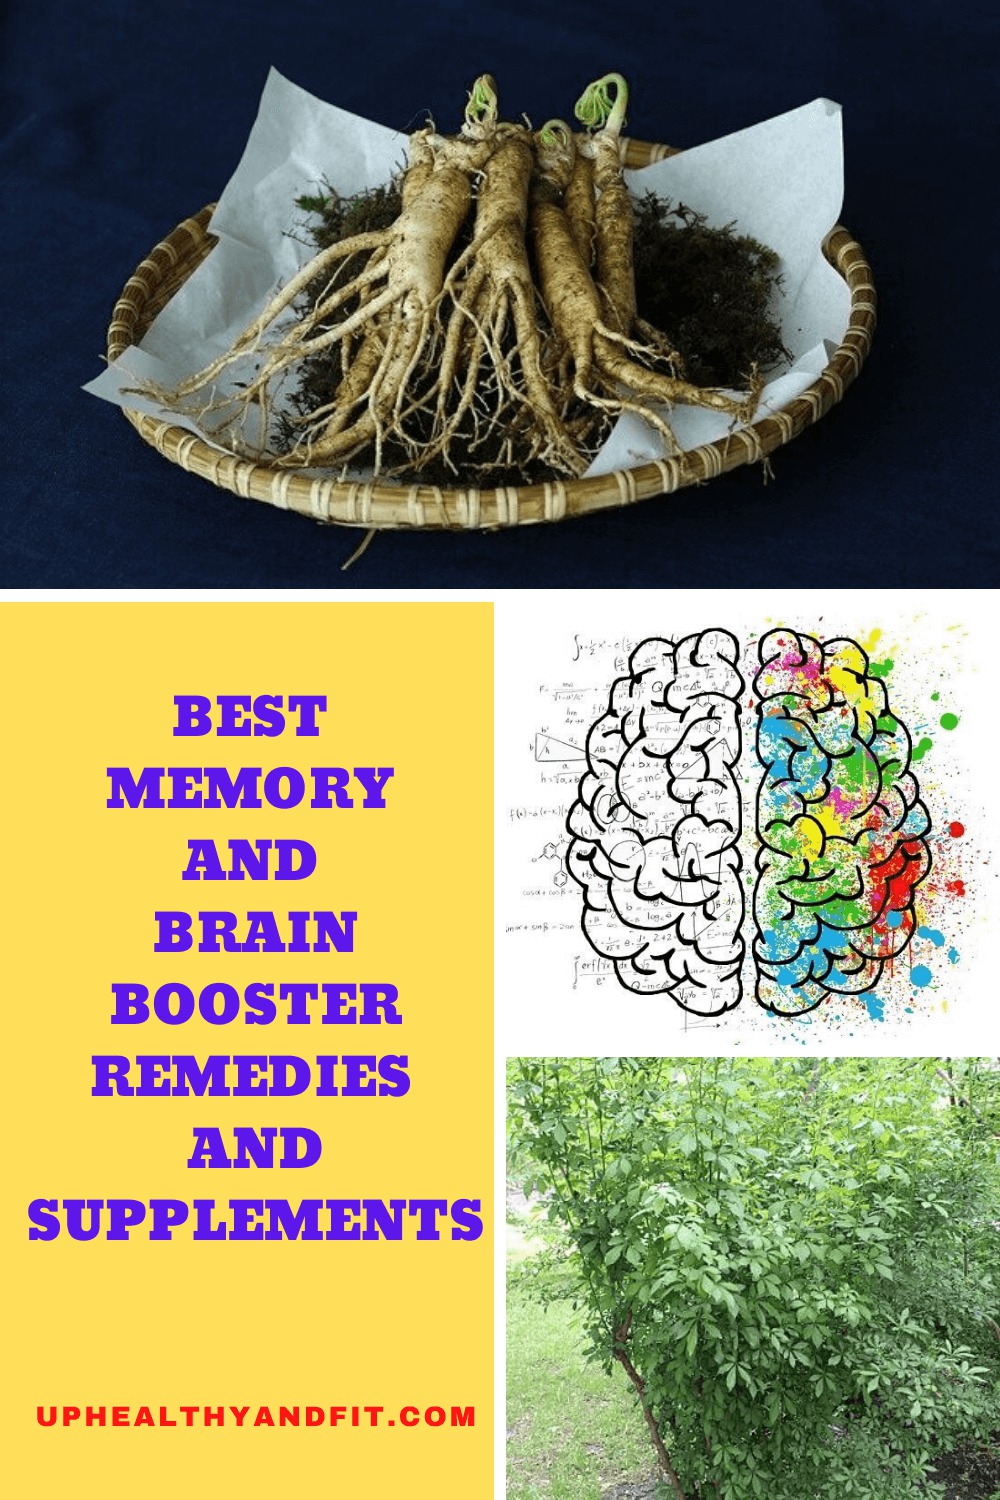 BEST MEMORY AND BRAIN BOOSTER REMEDIES AND SUPPLEMENTS